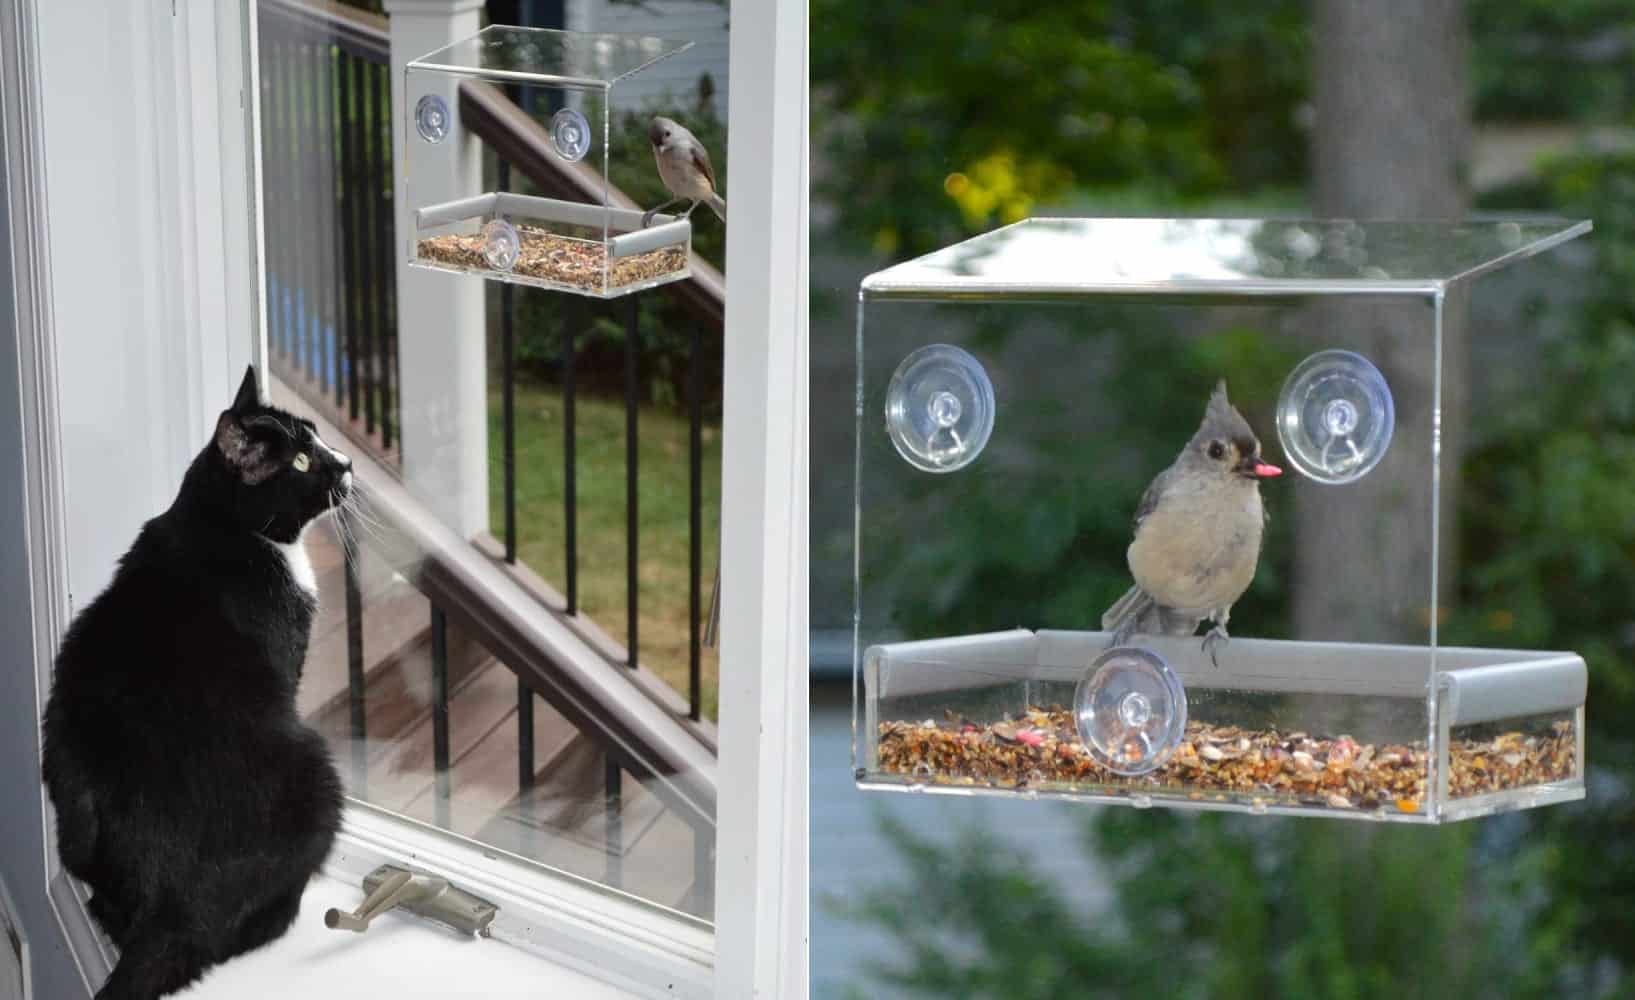 in house bird feeder THIS IS GREAT IF YOU DON'T HAVE CATS! I HAD